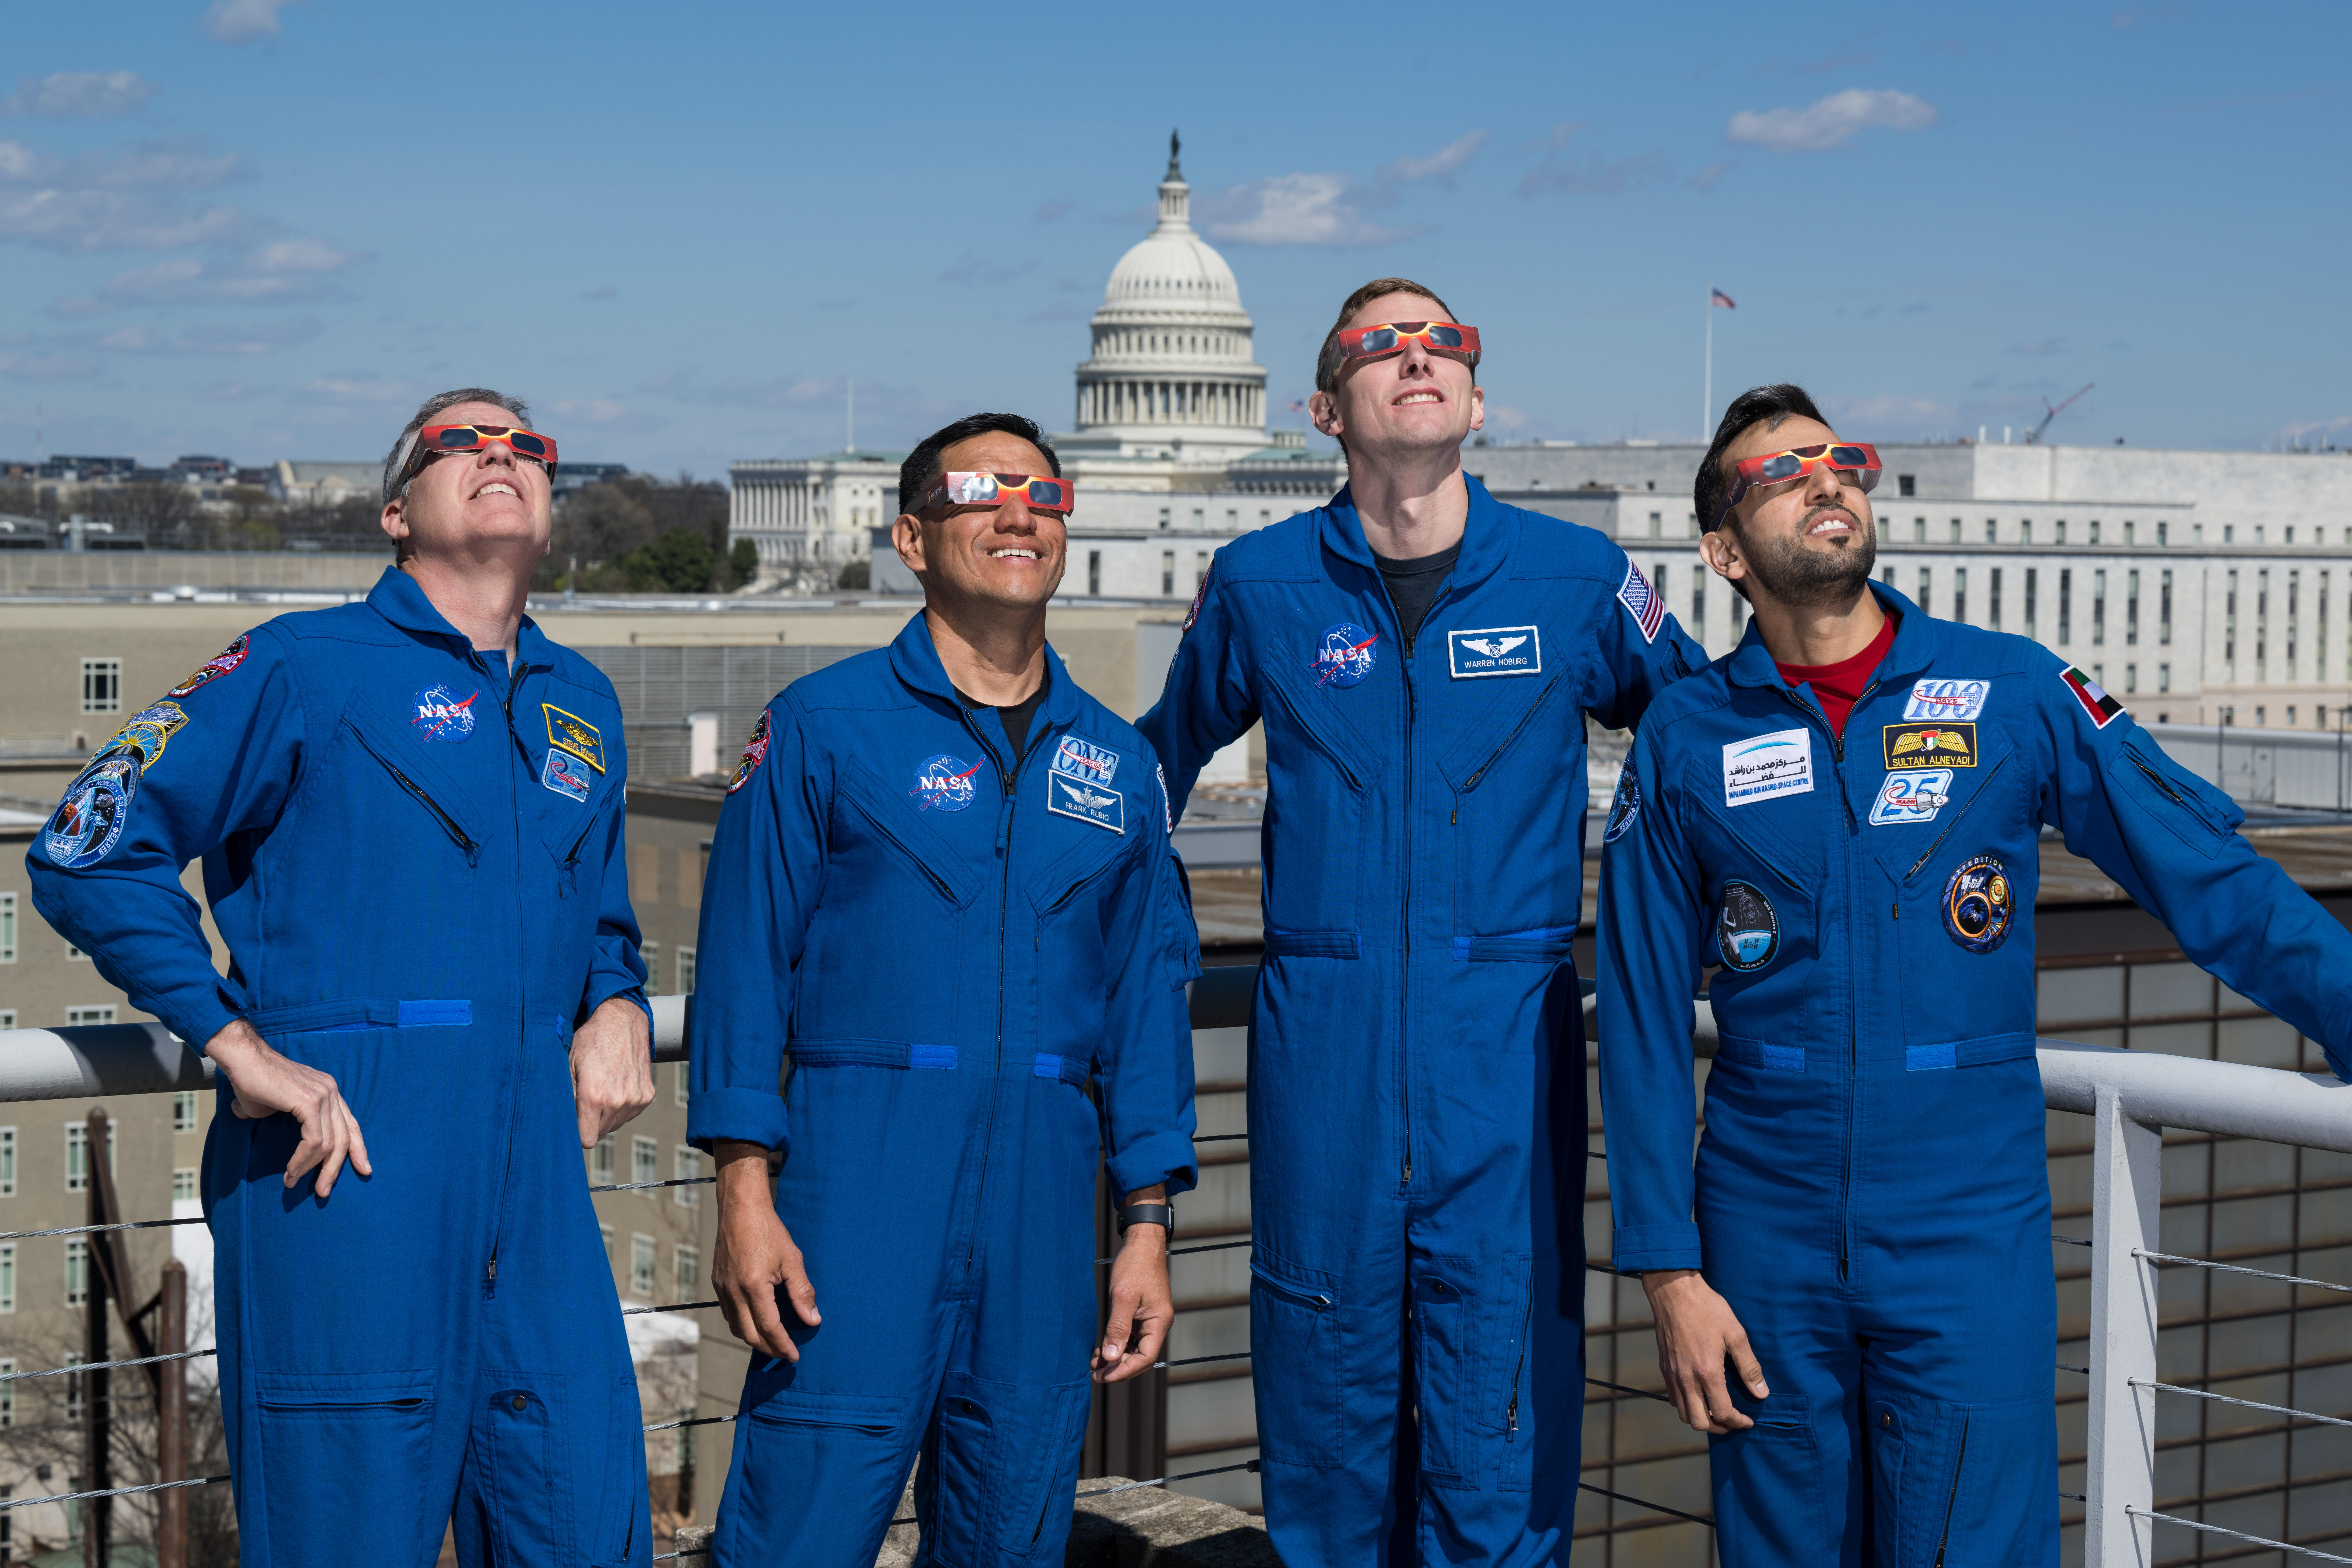 Four men wearing red, rectangular eclipse glasses and blue jumpsuits look up at the Sun. They are on the rooftop of a building. The U.S. Capitol dome is visible behind them.